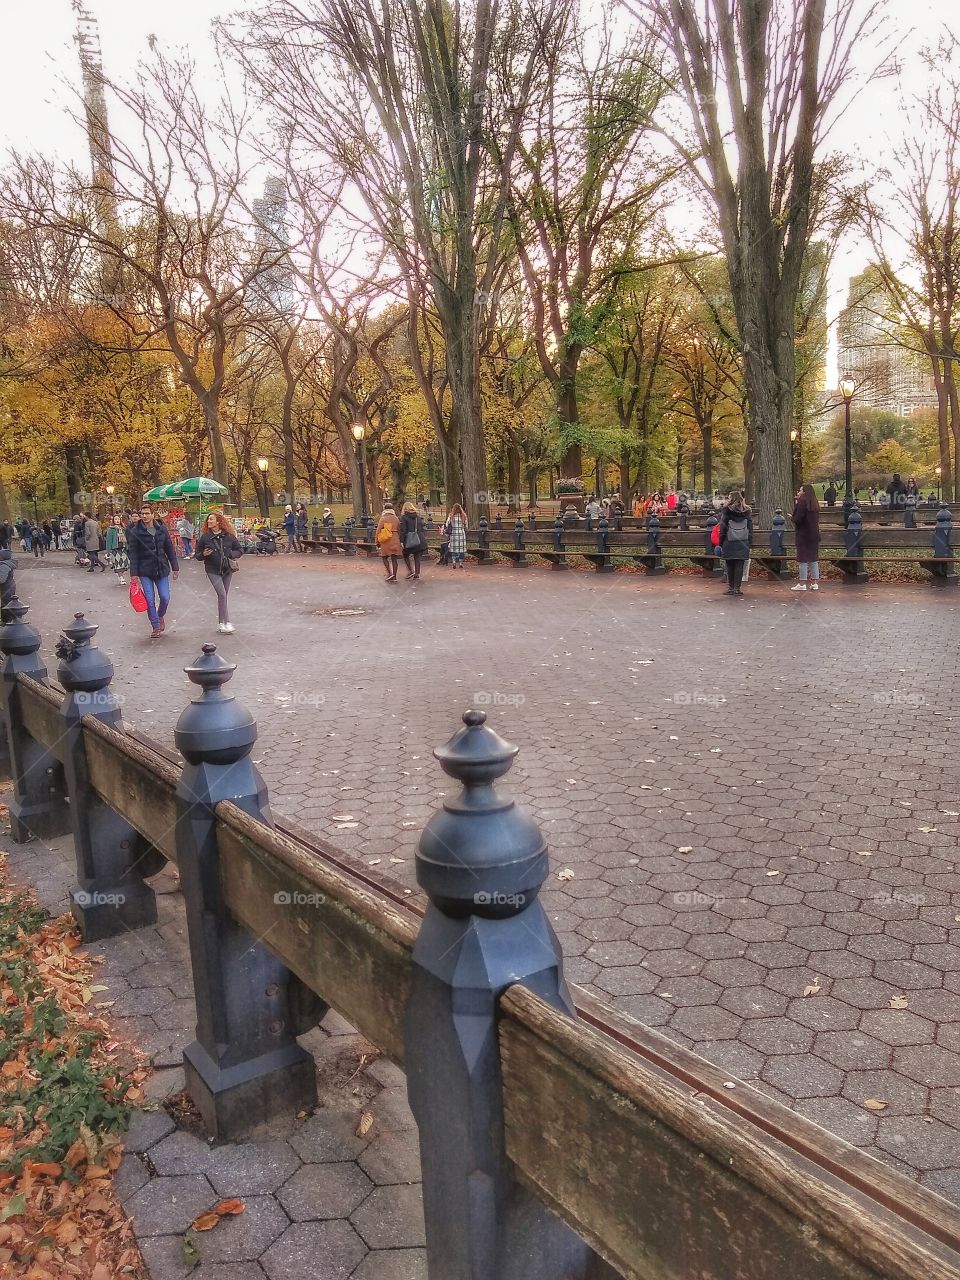 Central Park in autumn, New York City